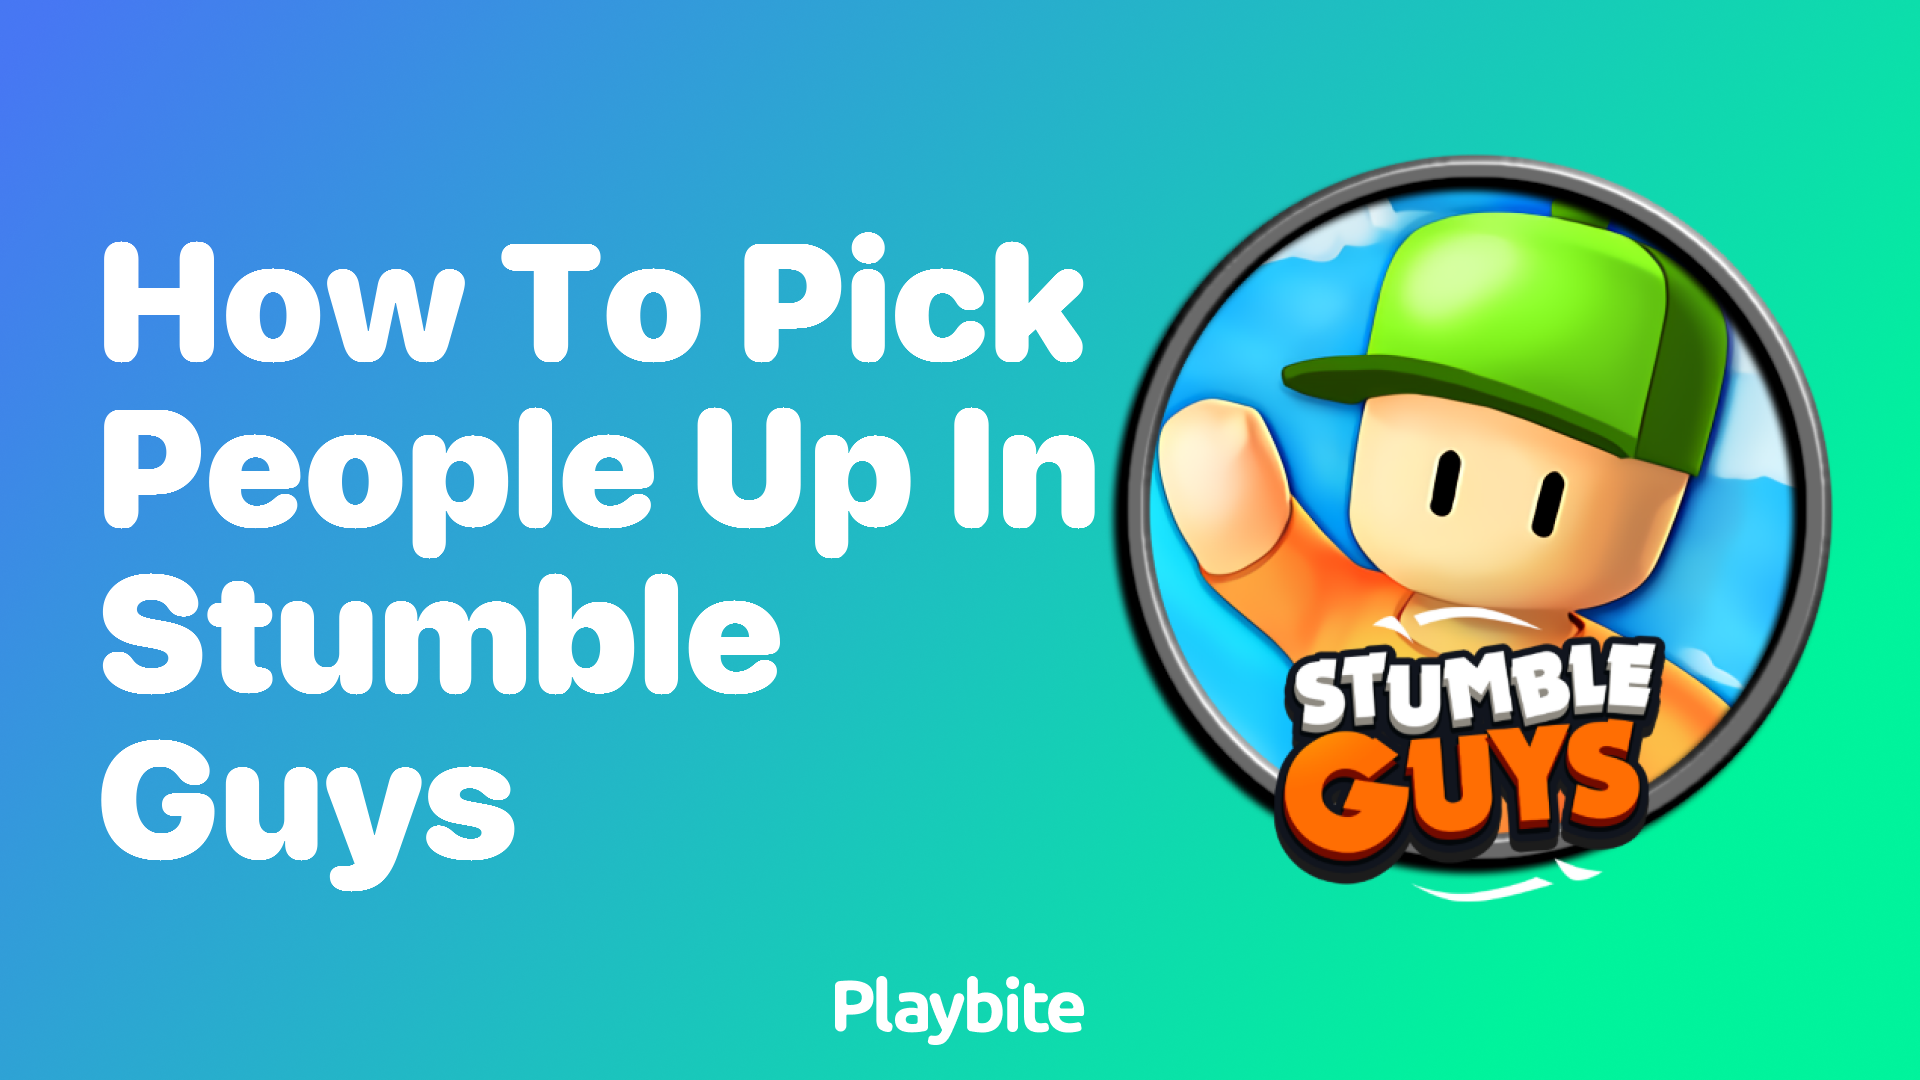 How to Pick People Up in Stumble Guys